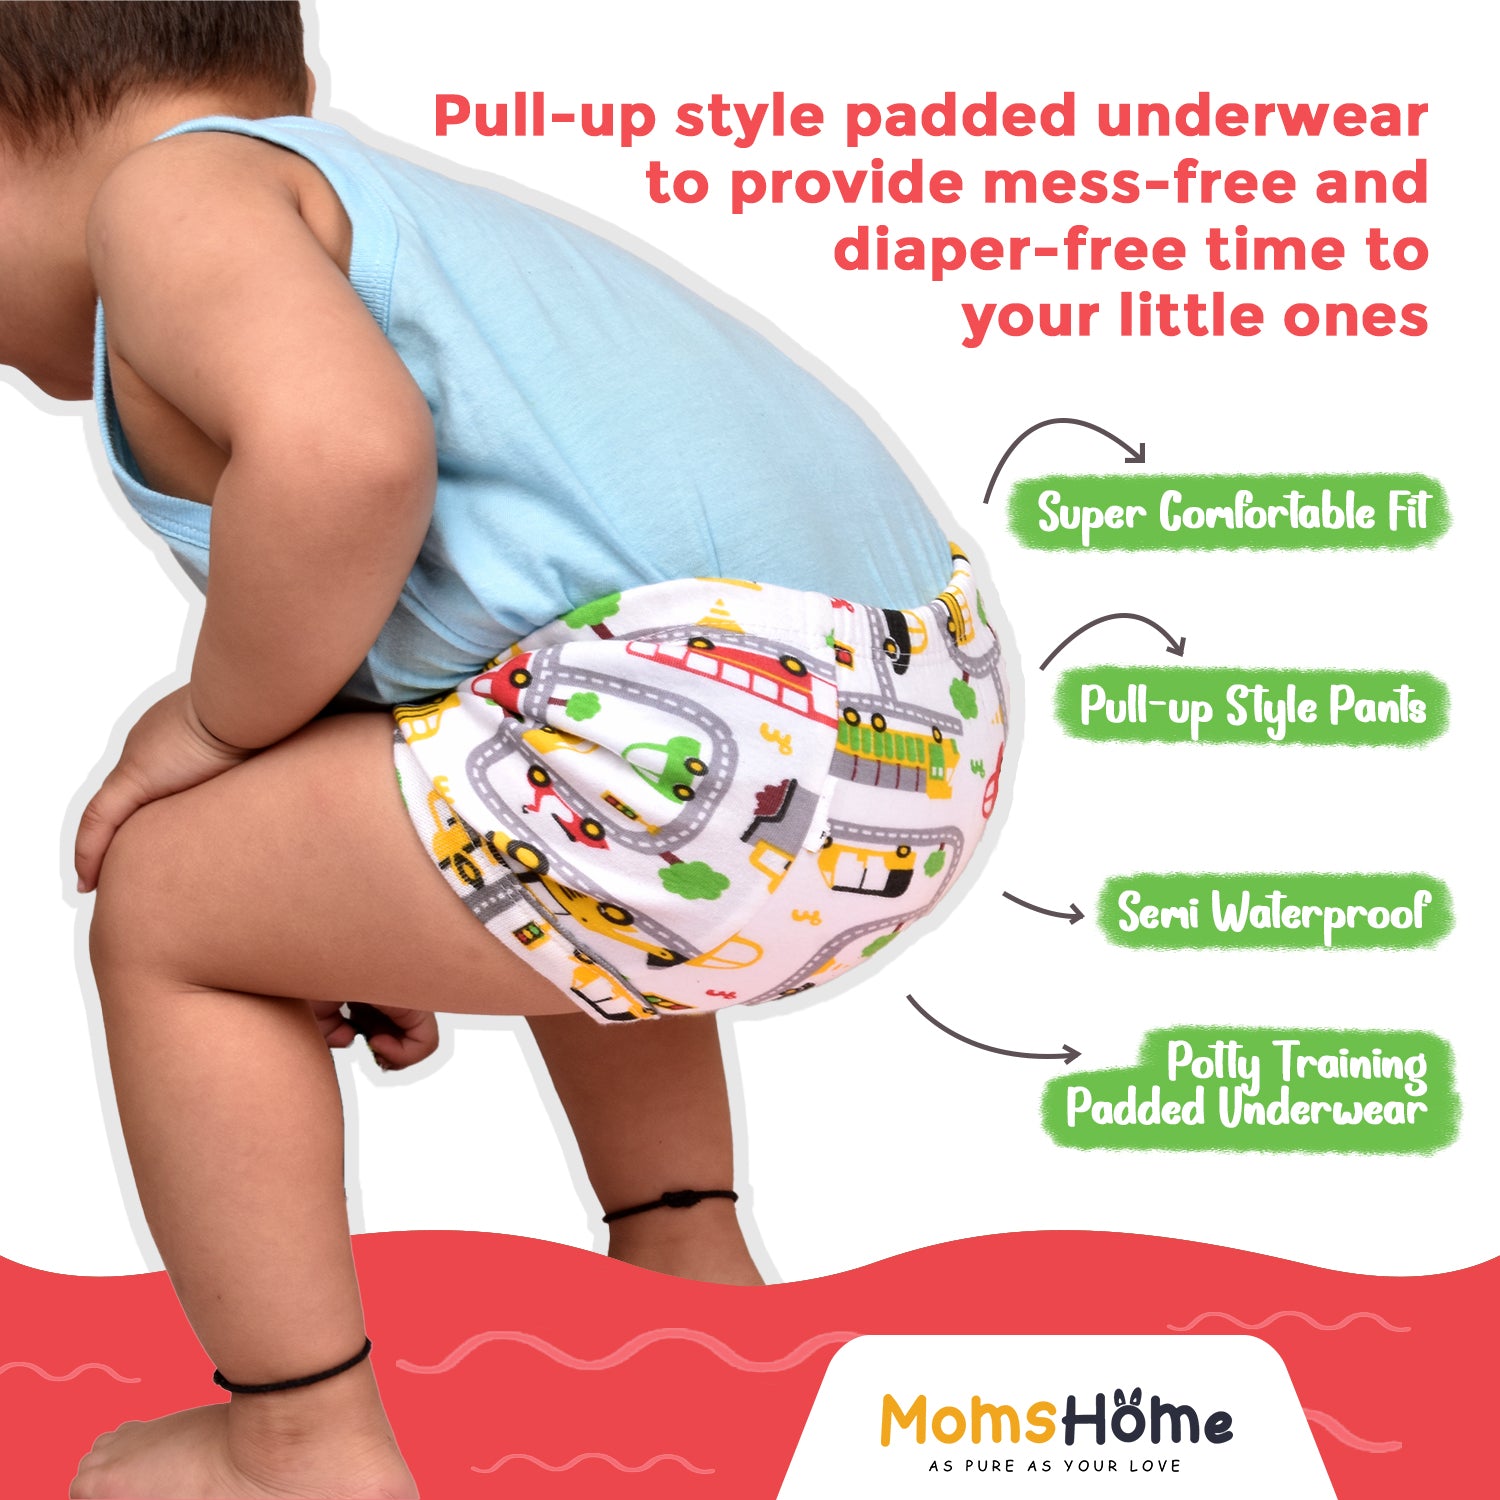 Huggies PullUps Are Great When It Comes to Potty Training Your Little One  PullUpsPottyBreaks  Redhead Mom